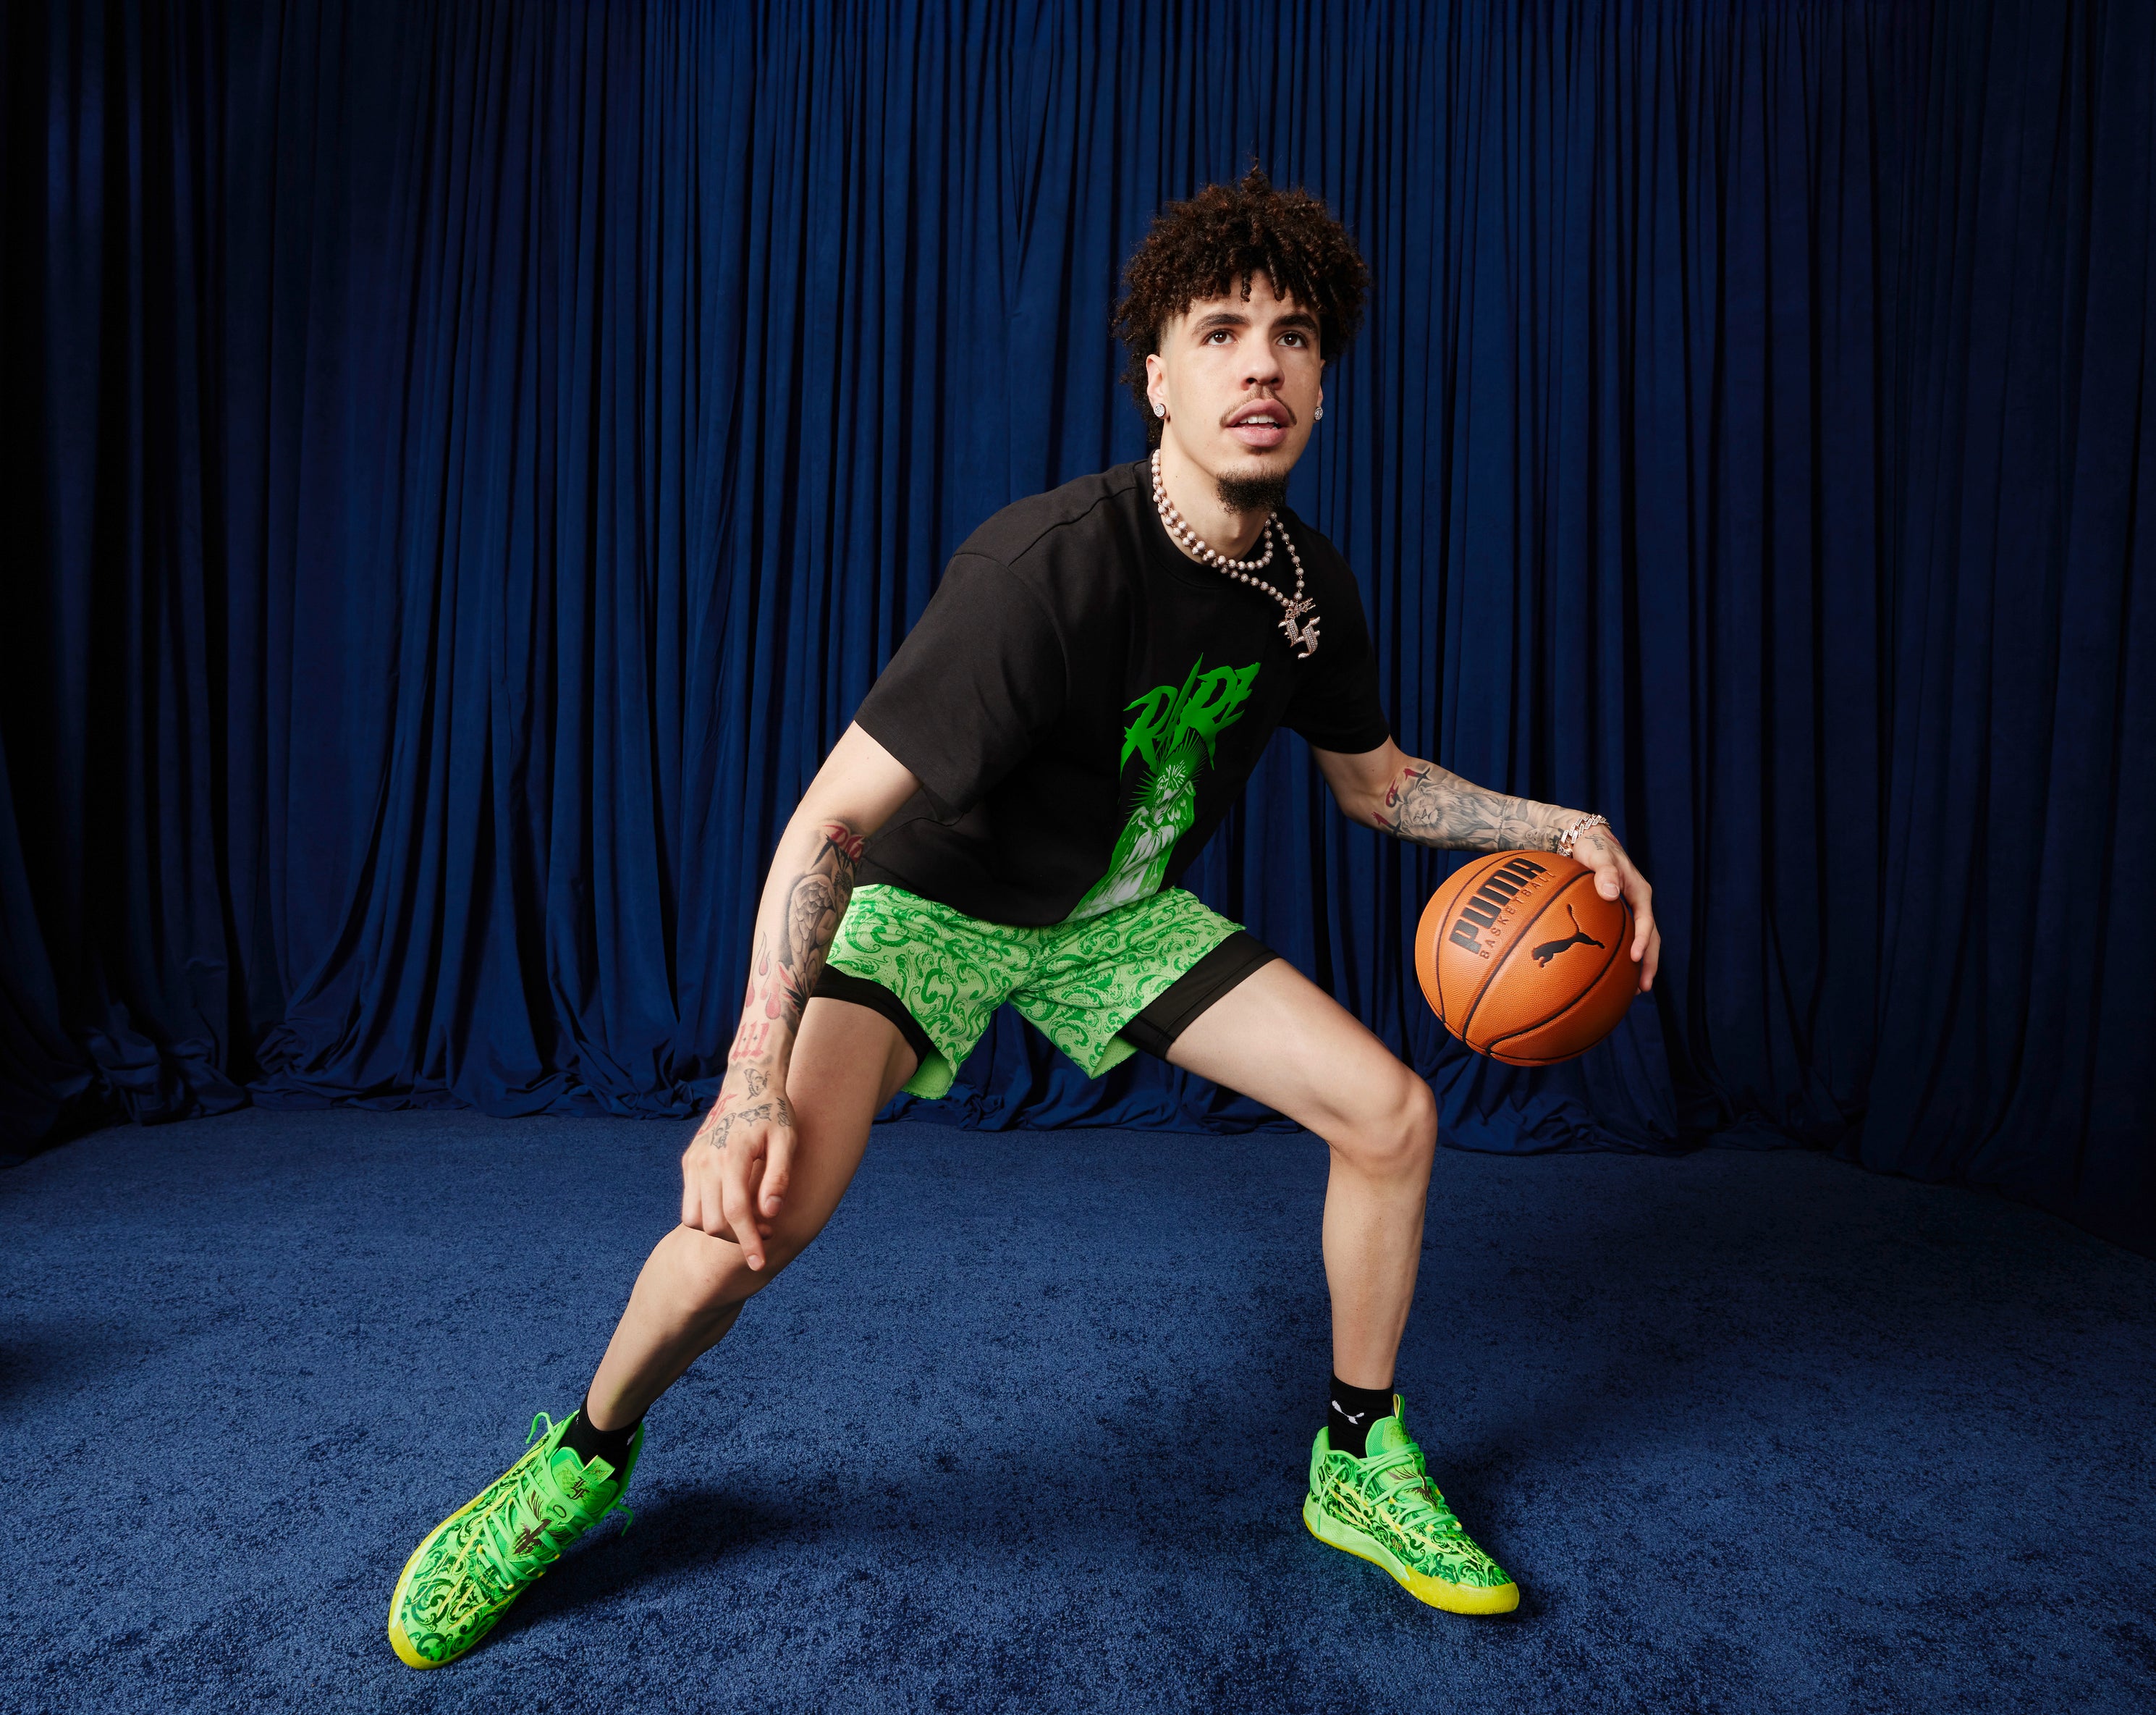 LaMelo Ball confirmed that he has signed a shoe deal with PUMA